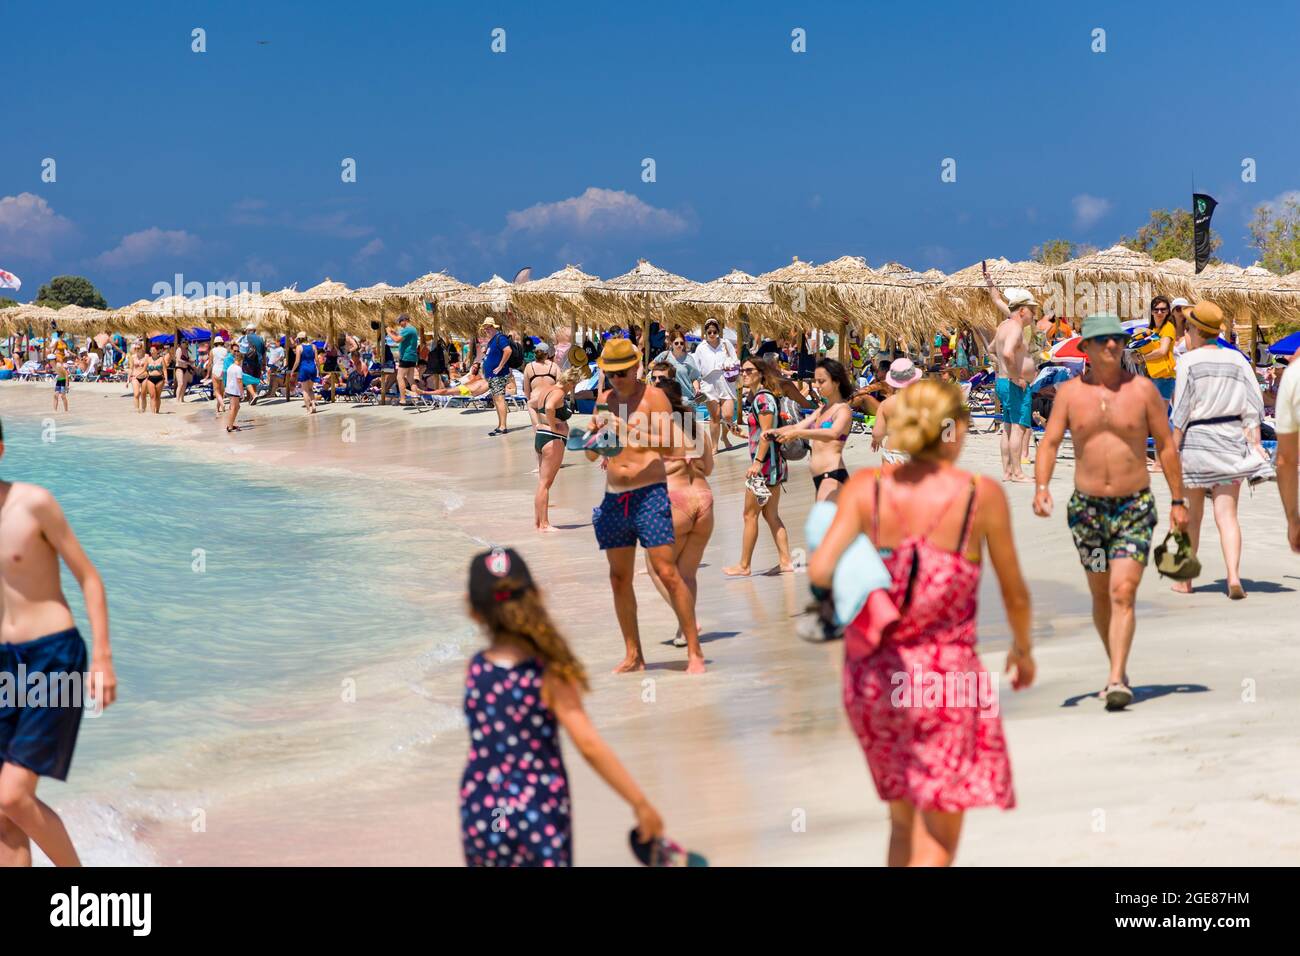 ELAFONISI, CRETE - JULY 19 2021: Crowds of tourists on the picturesque beach and shallow lagoons at Elafonissi on the Greek island of Crete. Stock Photo